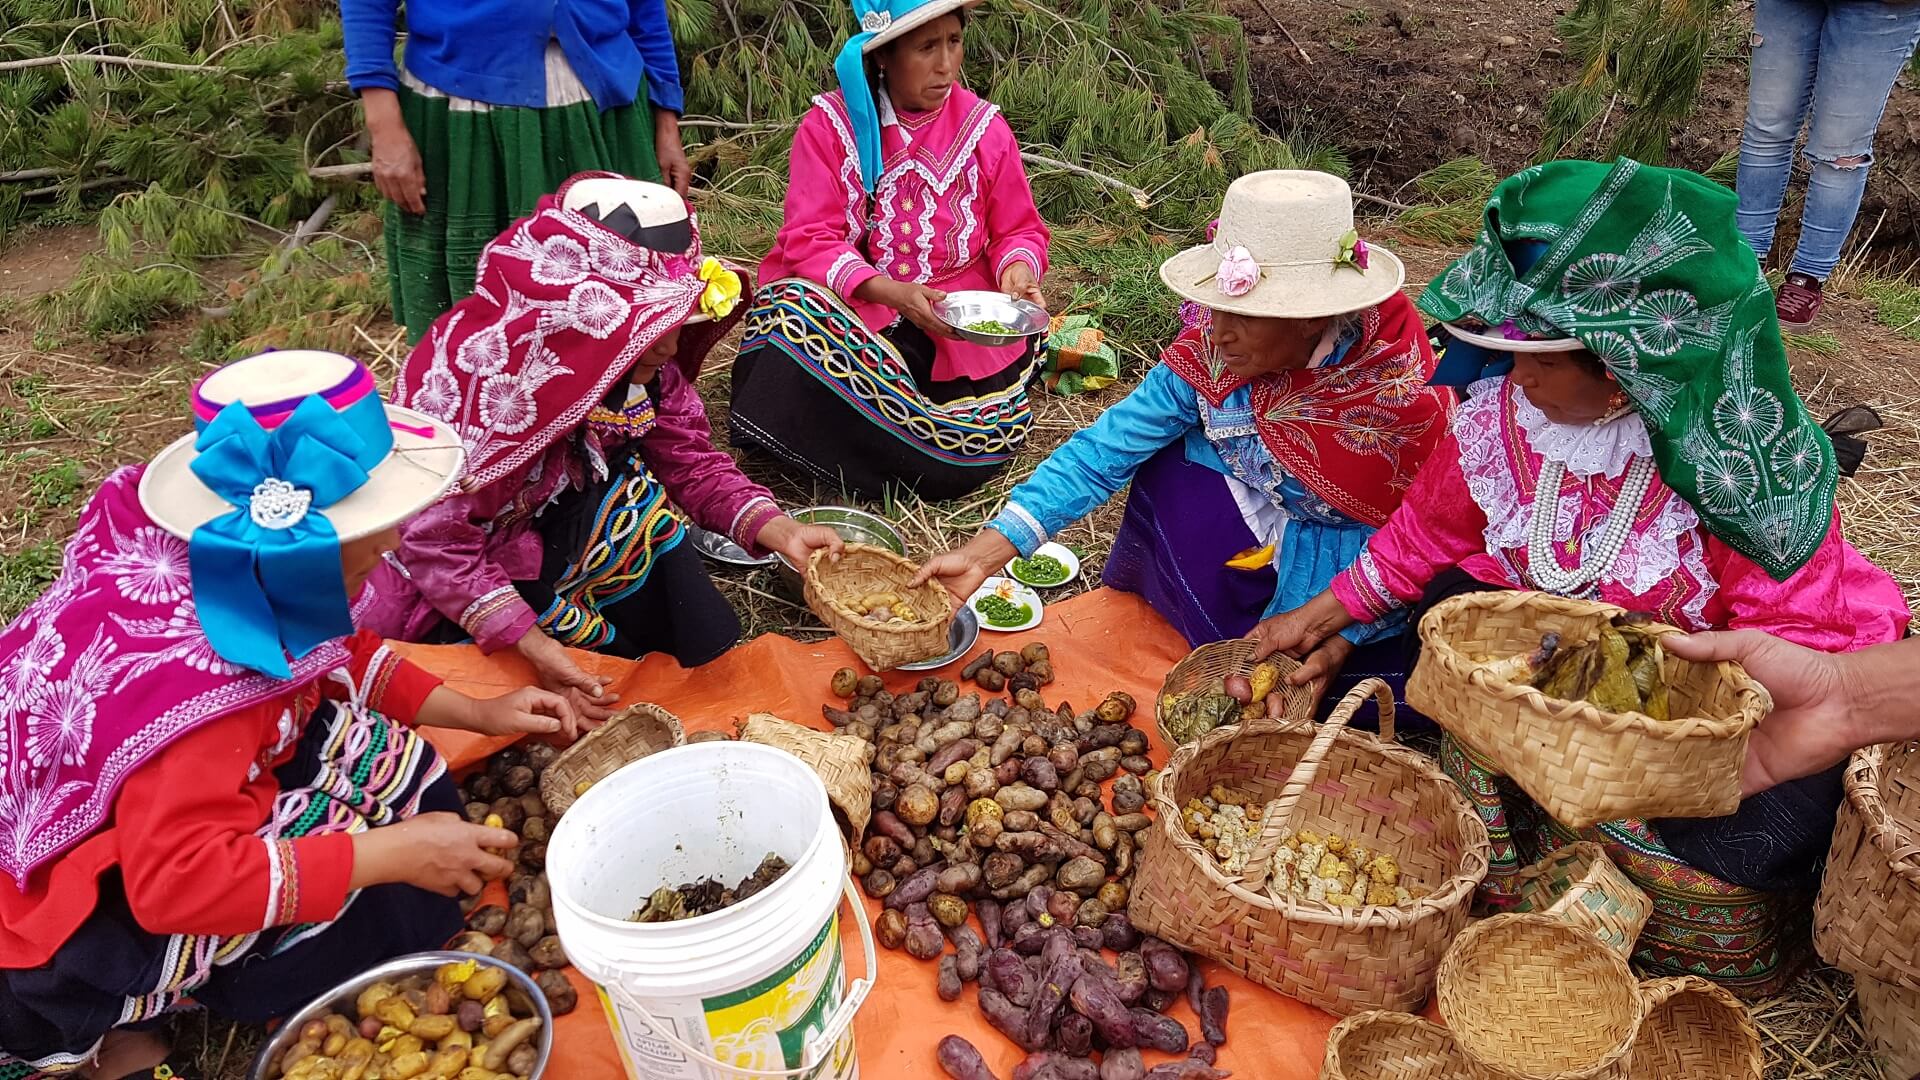 11Local women in traditional dresses in the Andean community of Vicos are distributing food prepared in a Pachamanca. RESPONSible Travel Peru